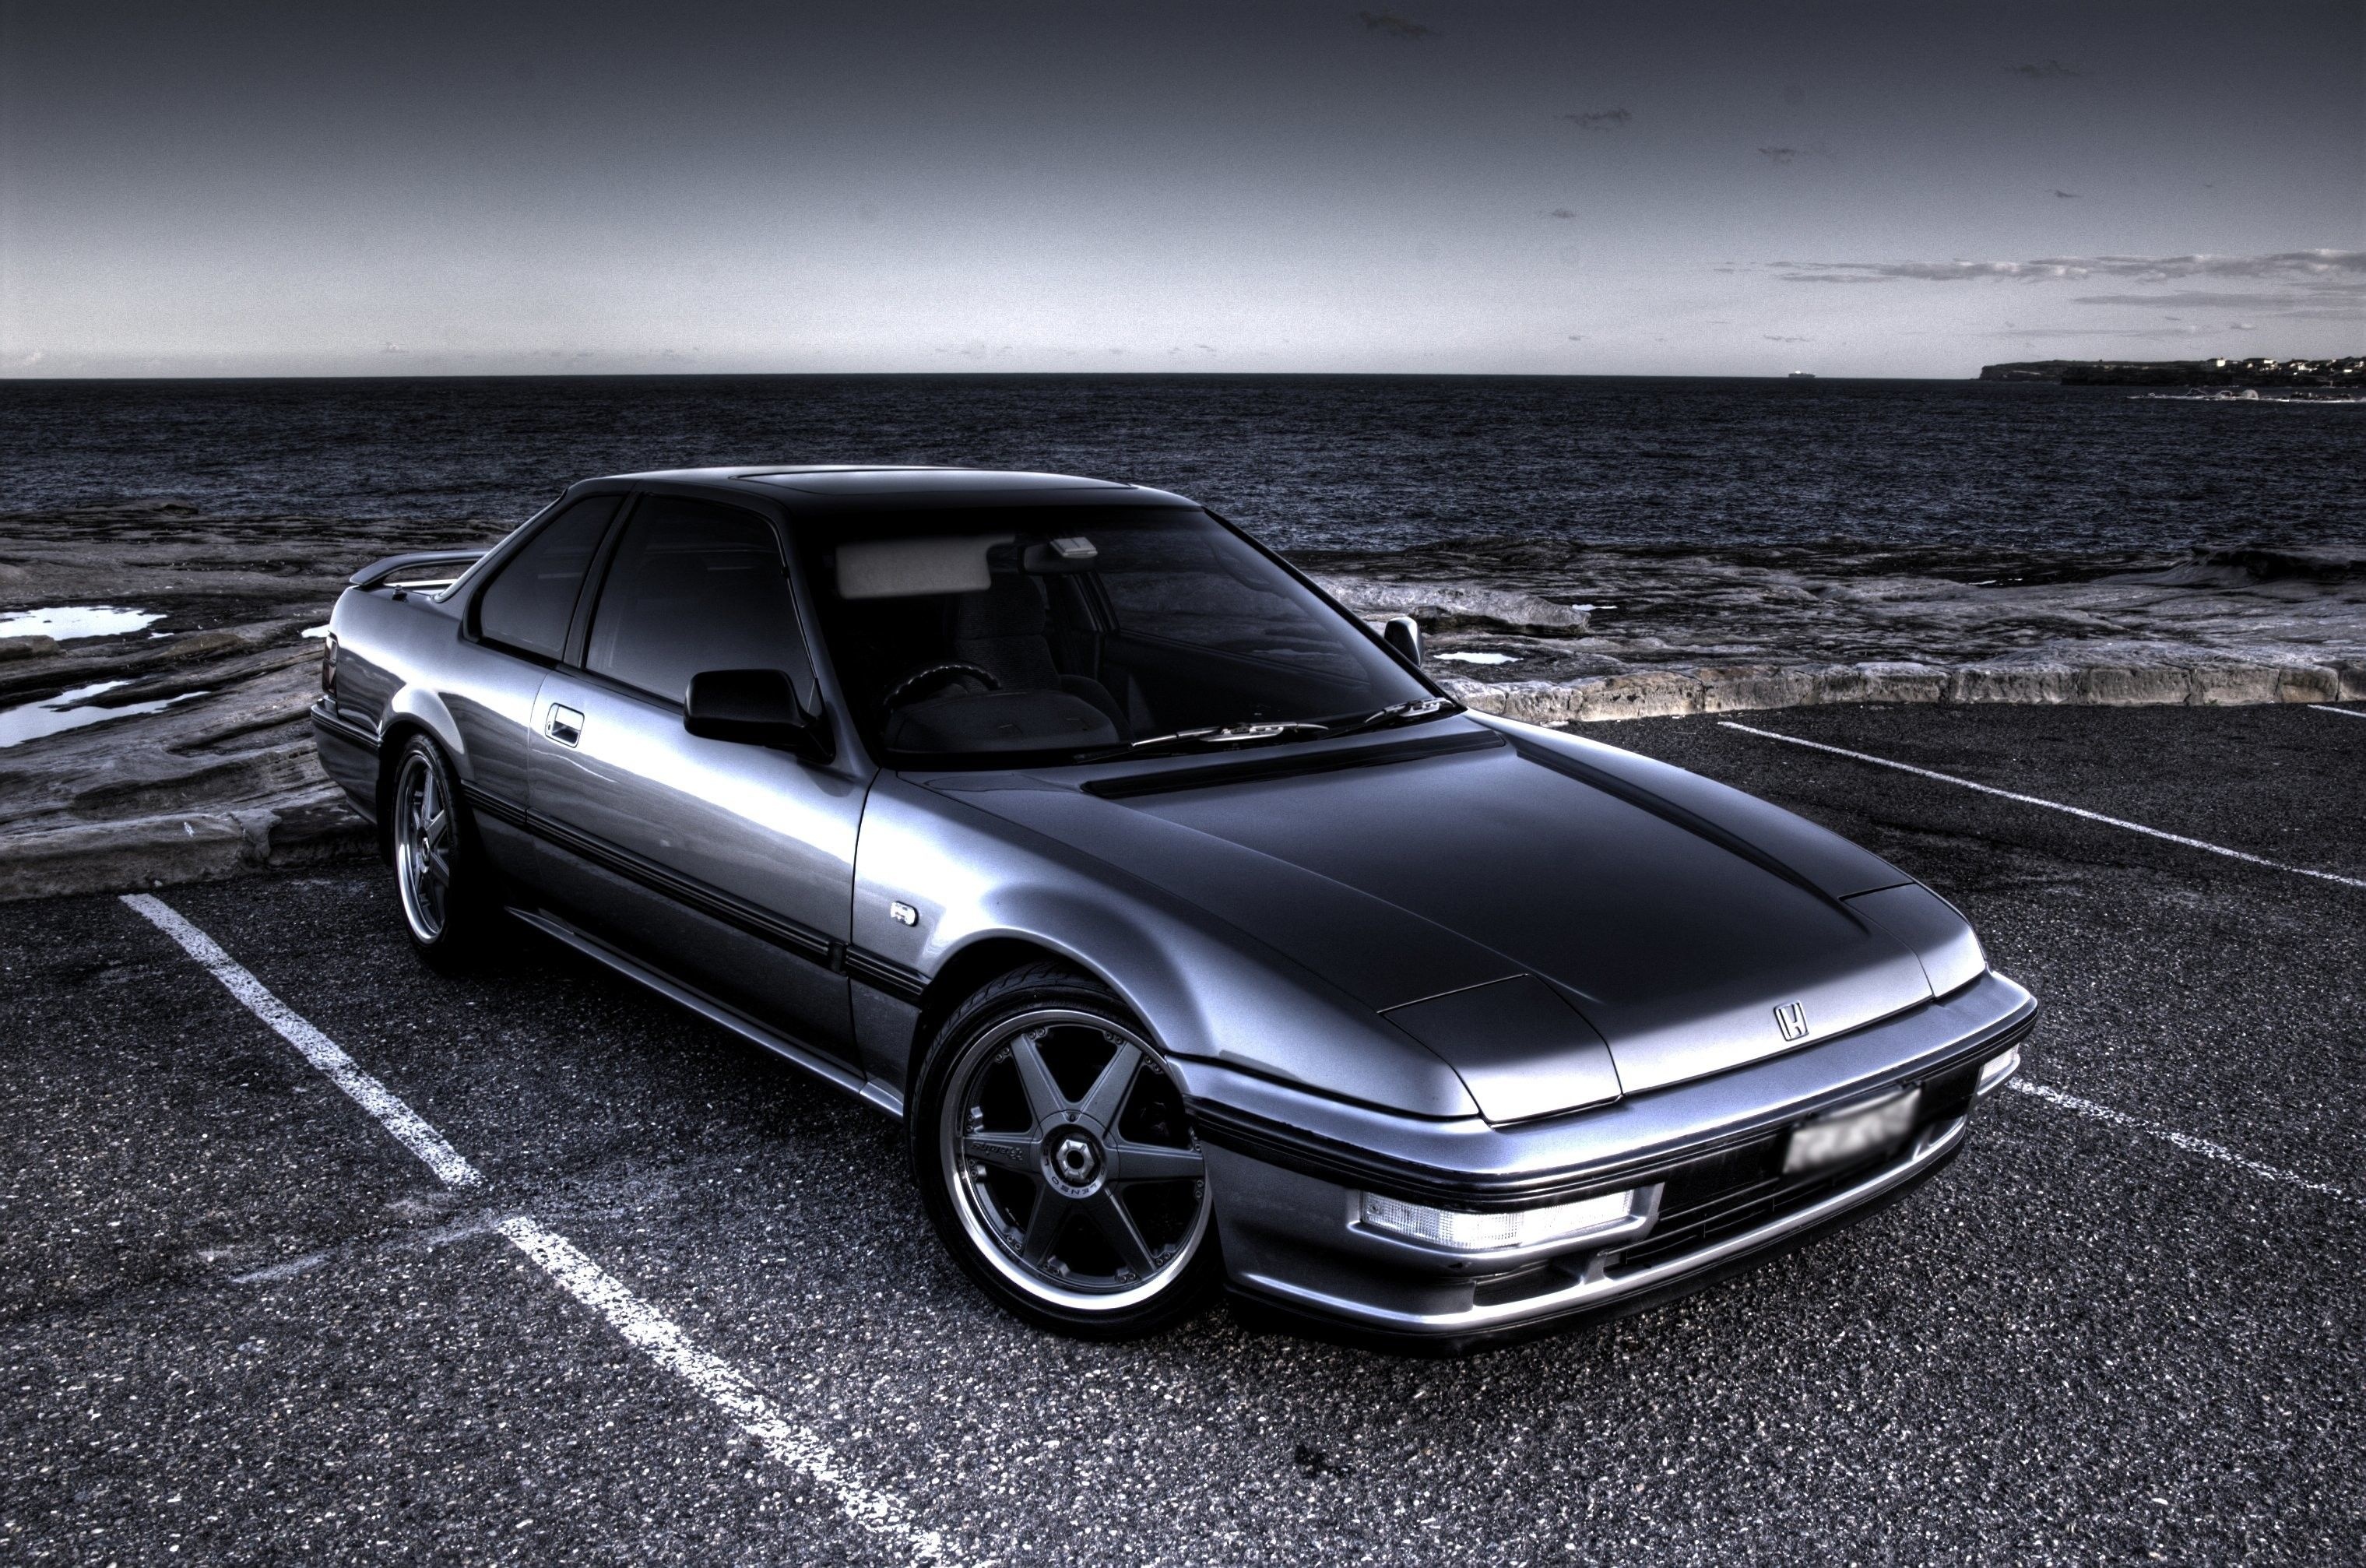 Honda Prelude wallpapers, High-quality backgrounds, 3040x2020 HD Desktop